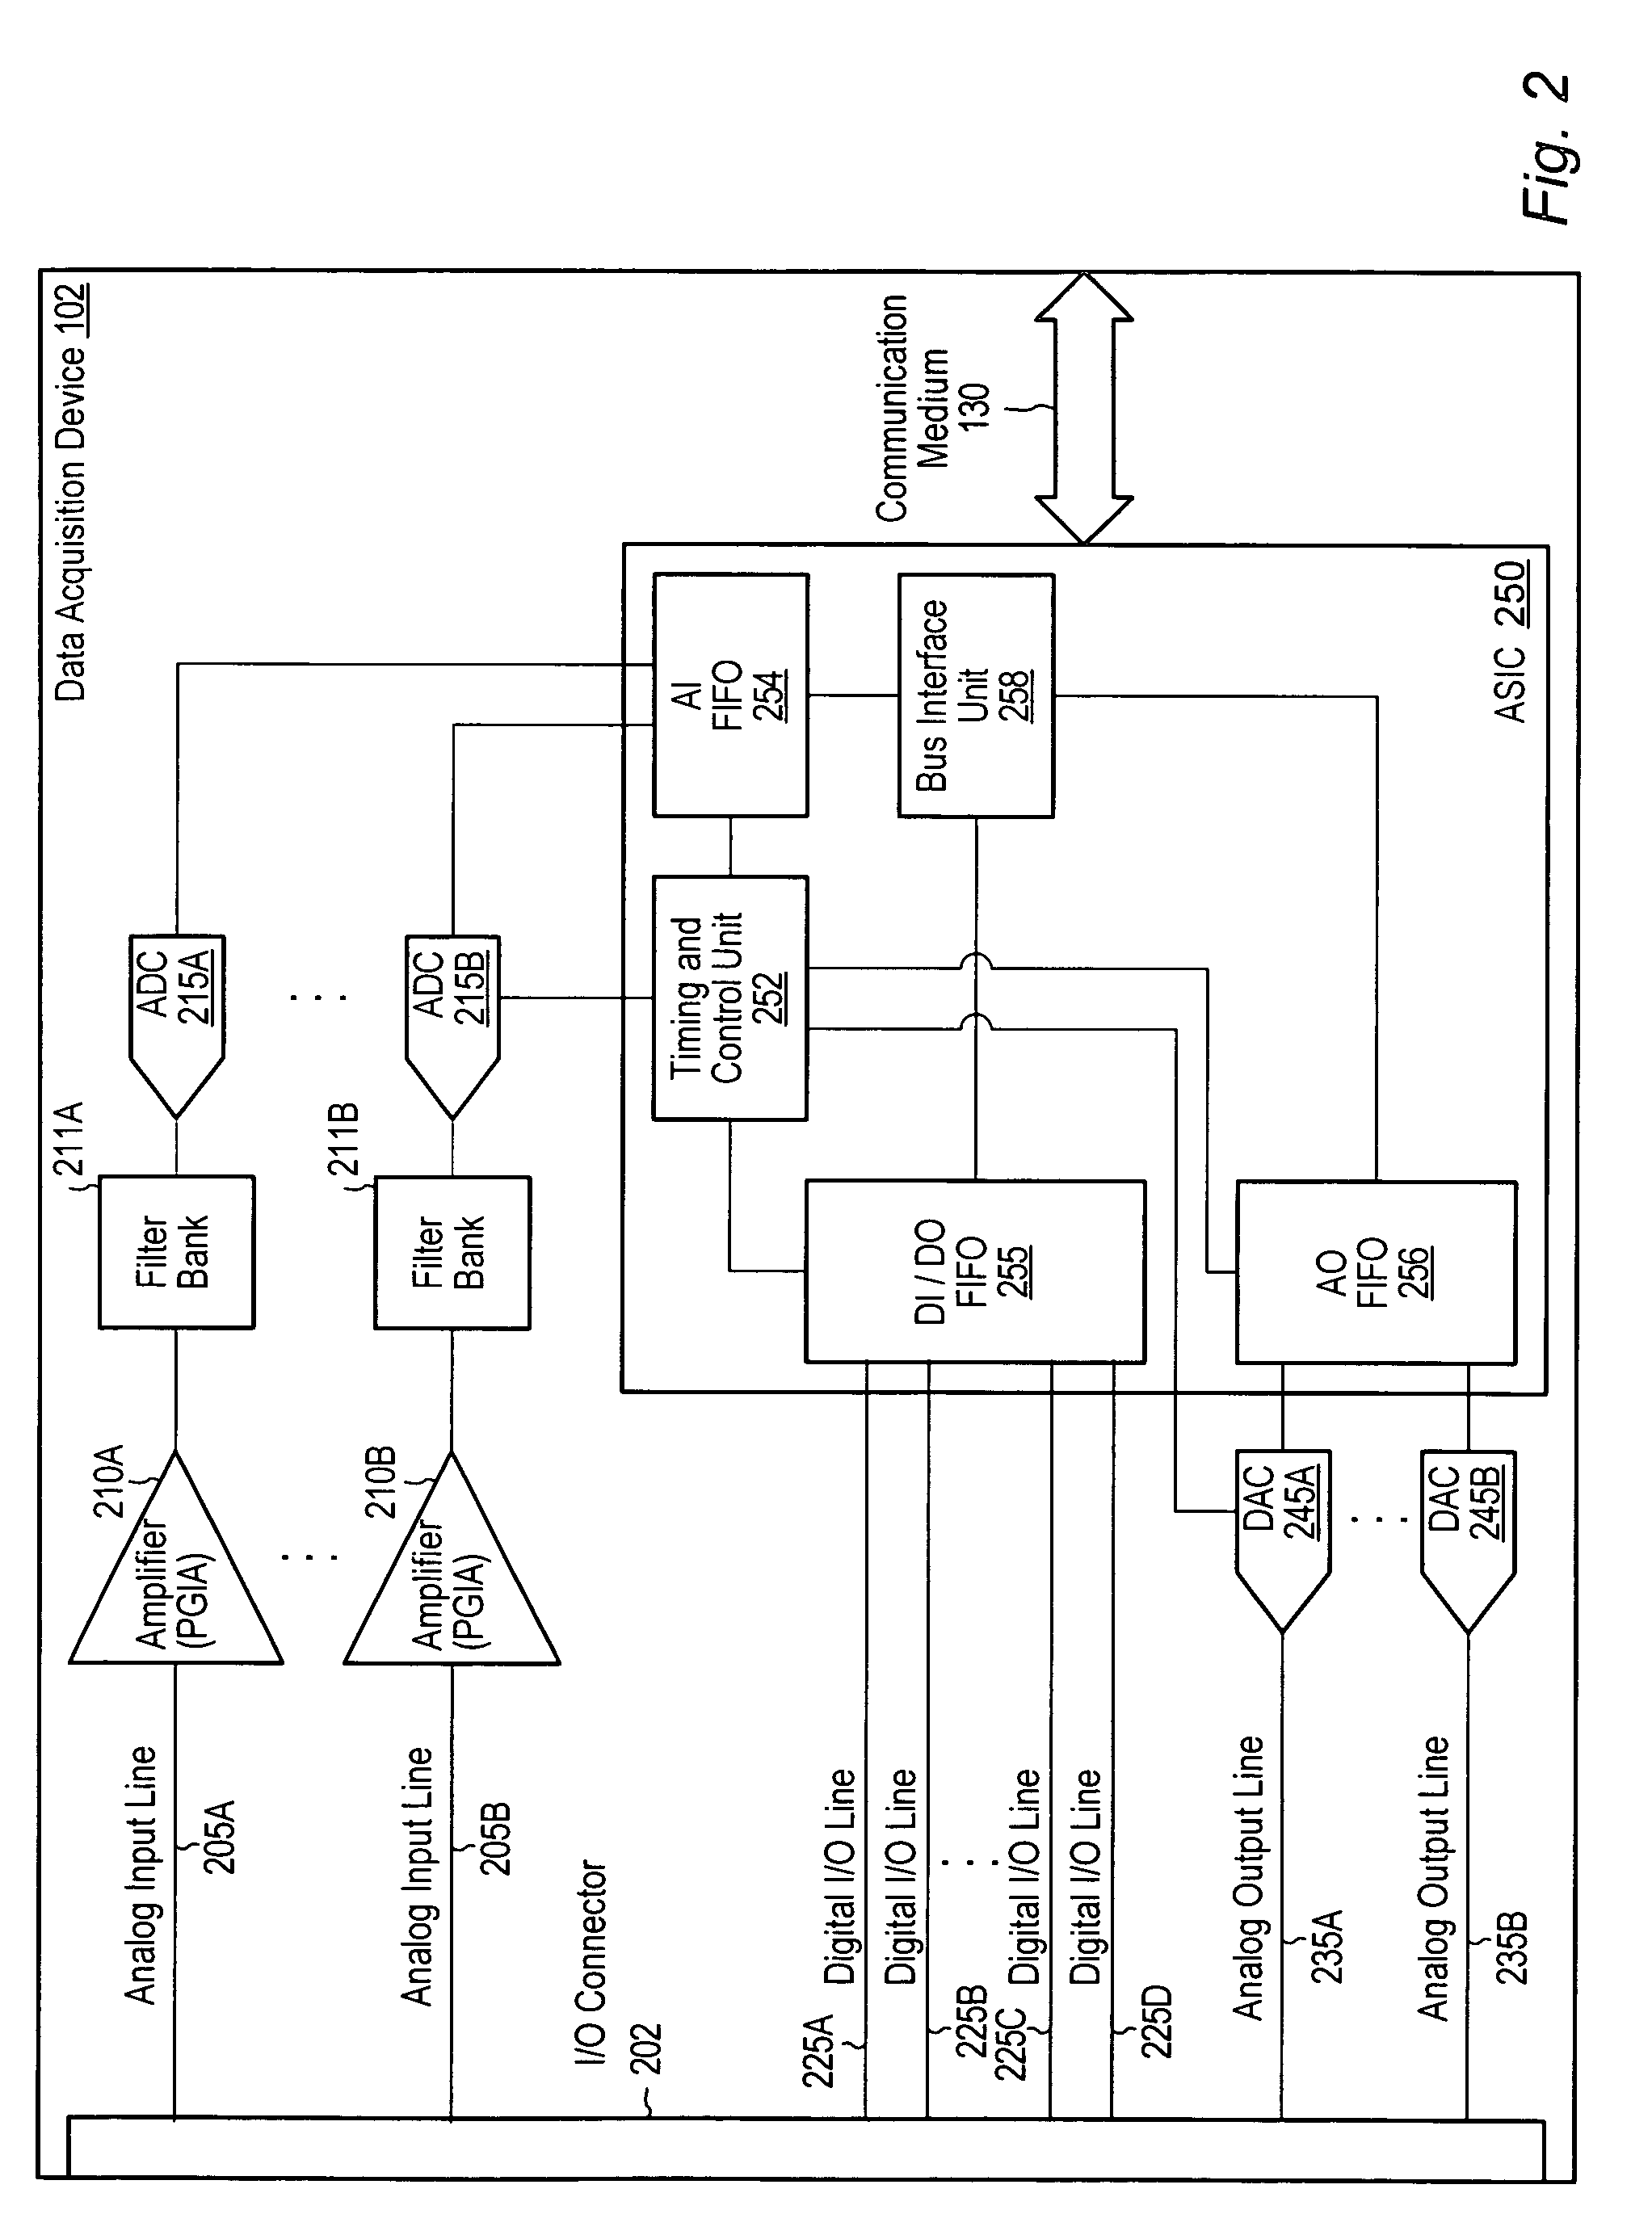 Programmable gain instrumentation amplifier with improved gain multiplexers